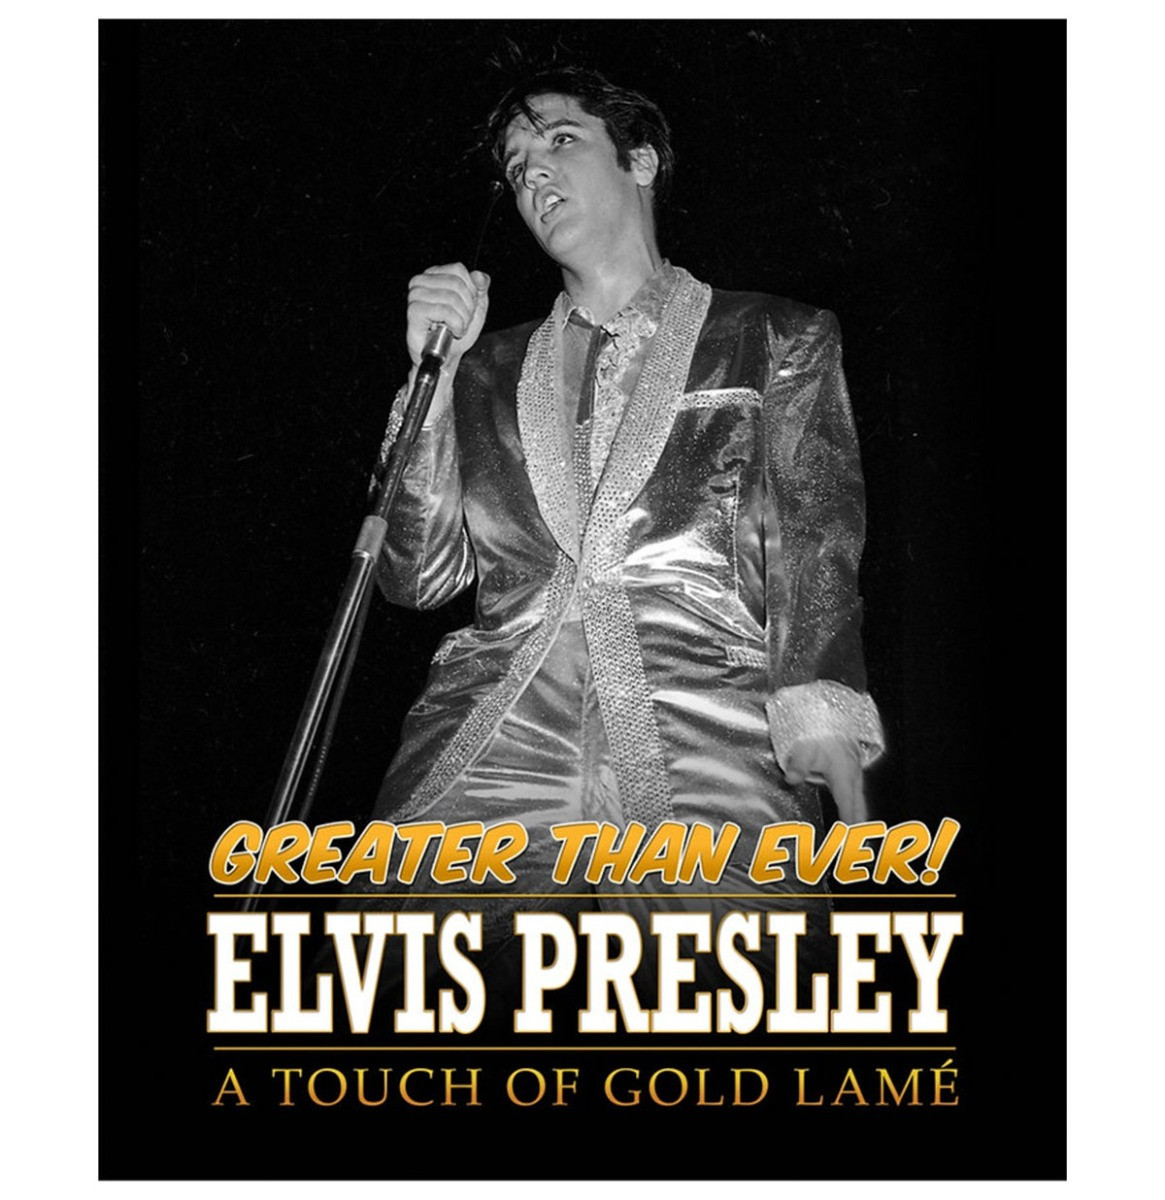 Greater Than Ever - Elvis Presley A Touch of Gold Lamé Boek